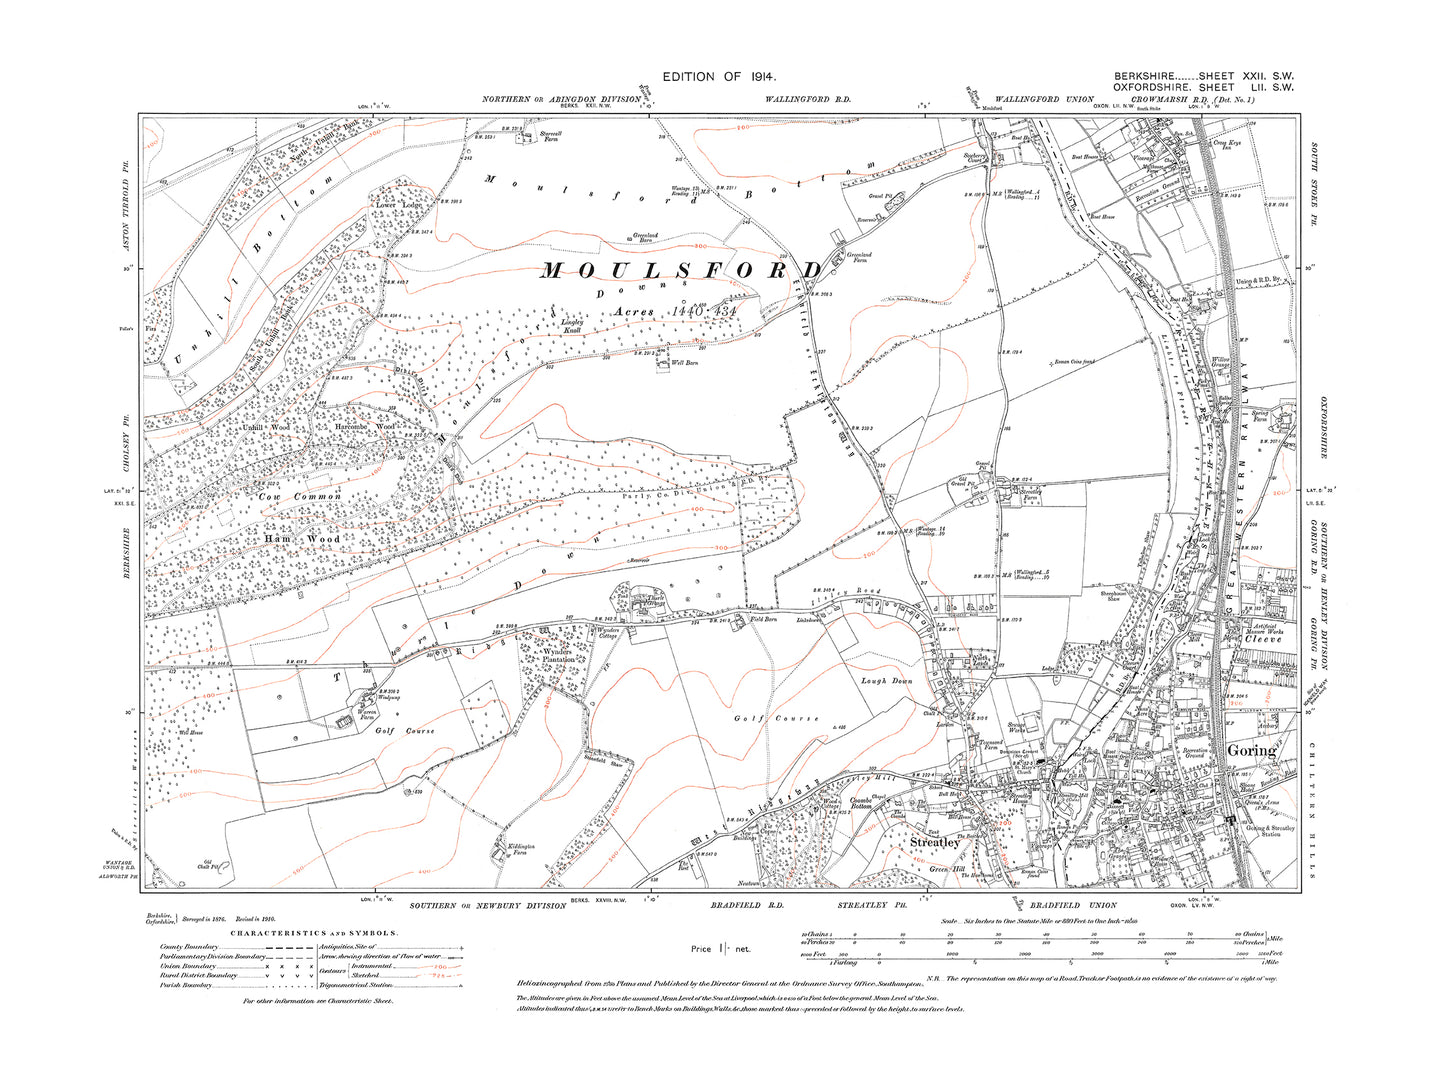 A 1914 map showing Streatley in Berkshire - OS 1:10560 scale map, Berks 22SW